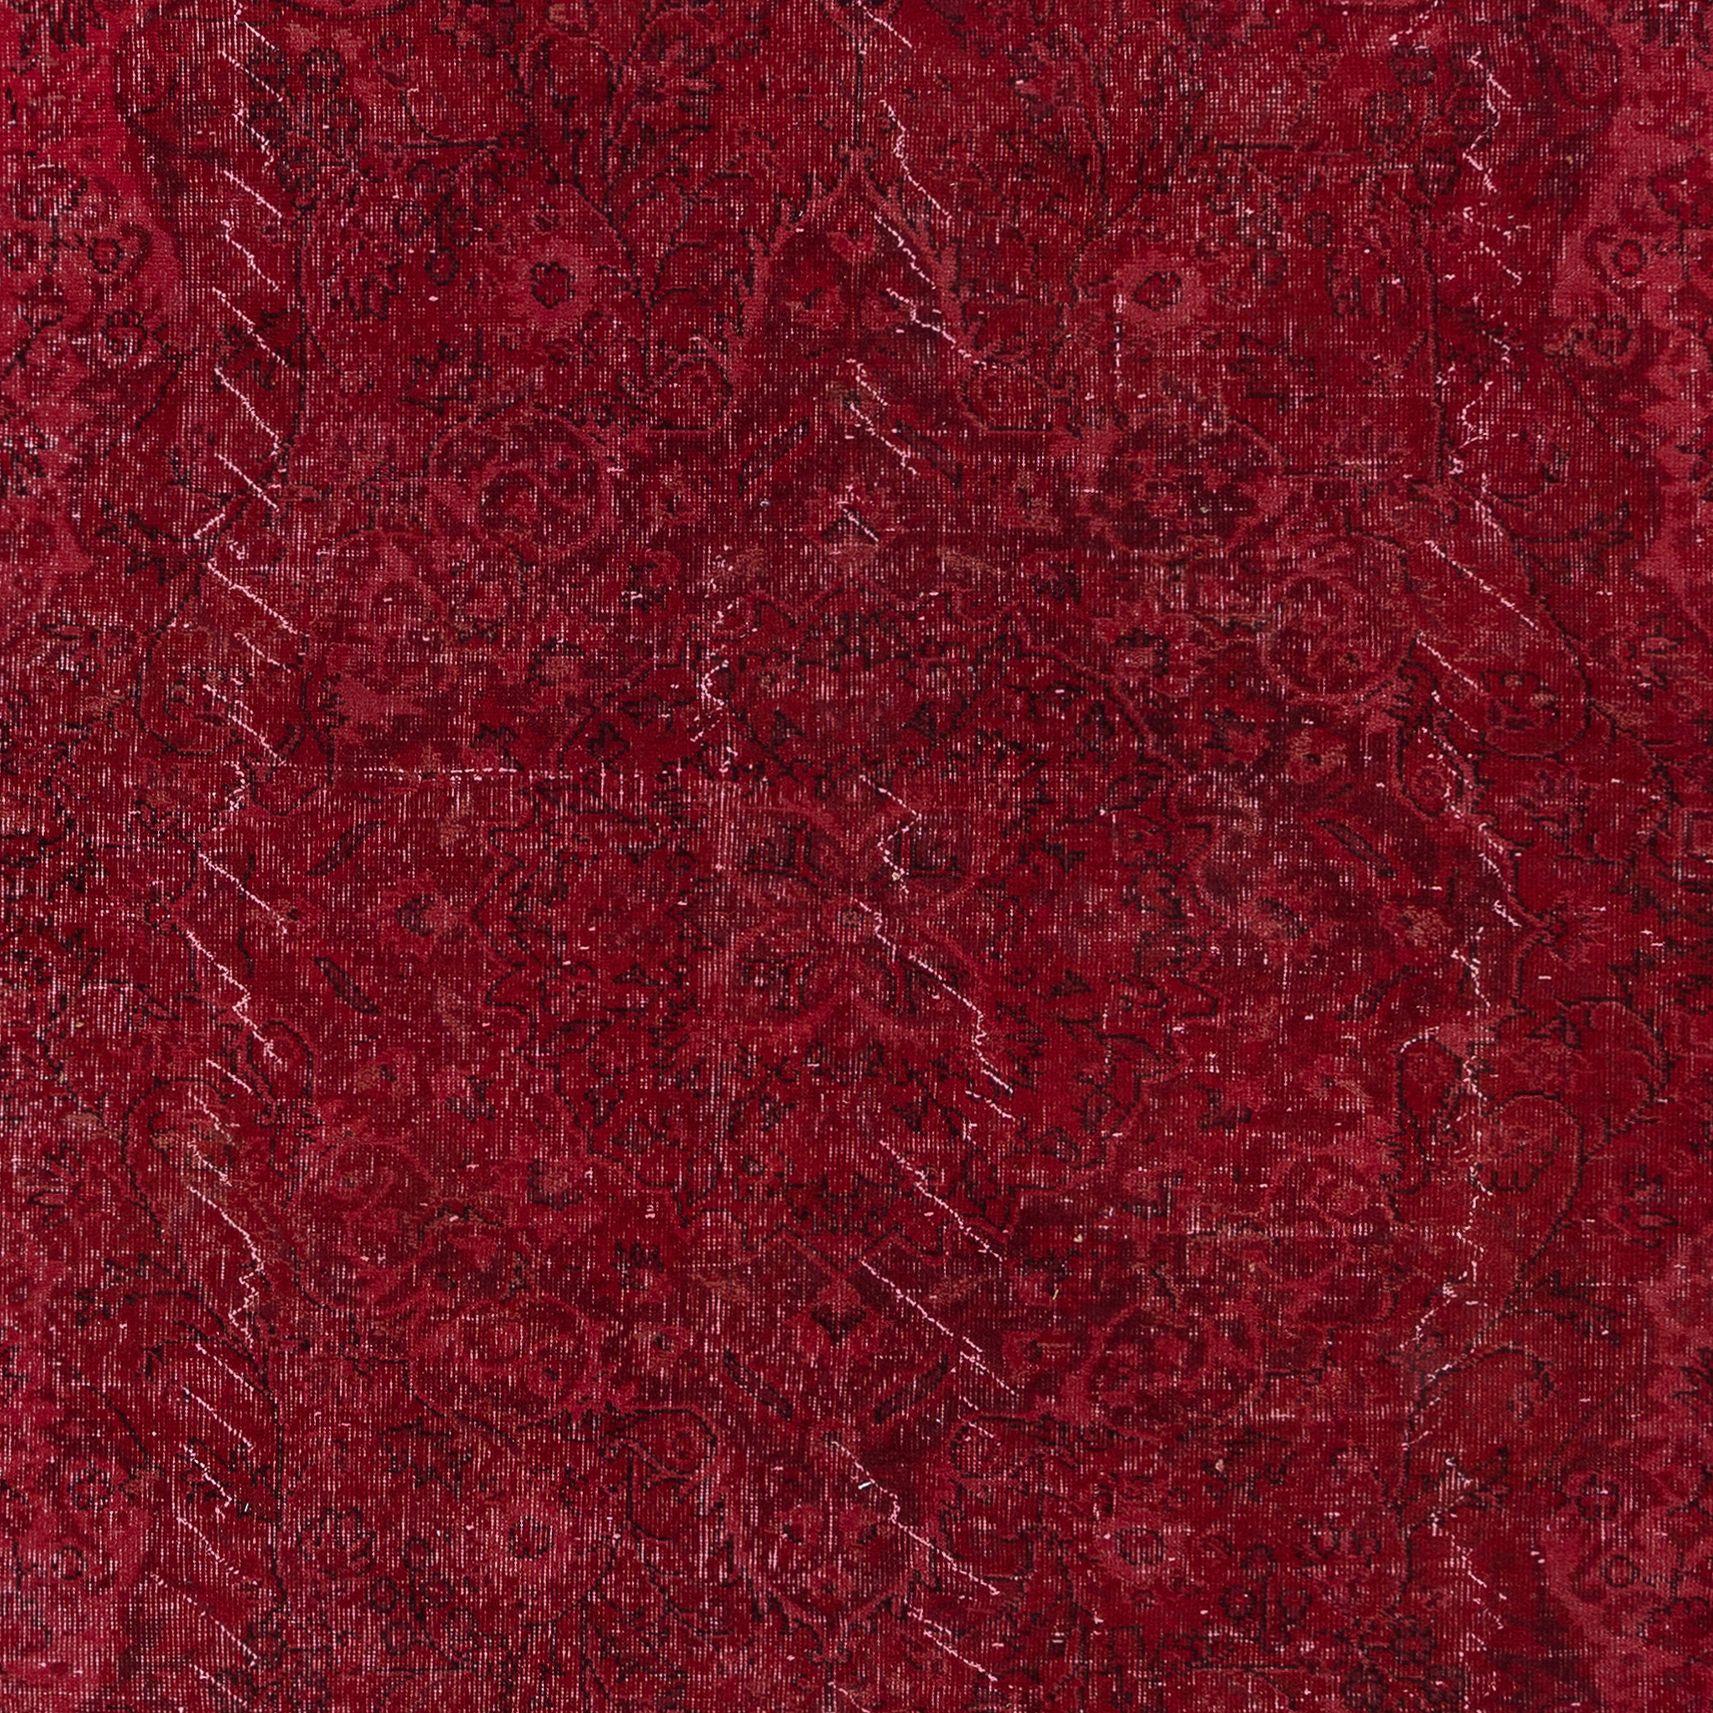 7x10.4 Ft Unique Handmade Burgundy Red Rug, Contemporary Turkish Wool Carpet In Good Condition For Sale In Philadelphia, PA